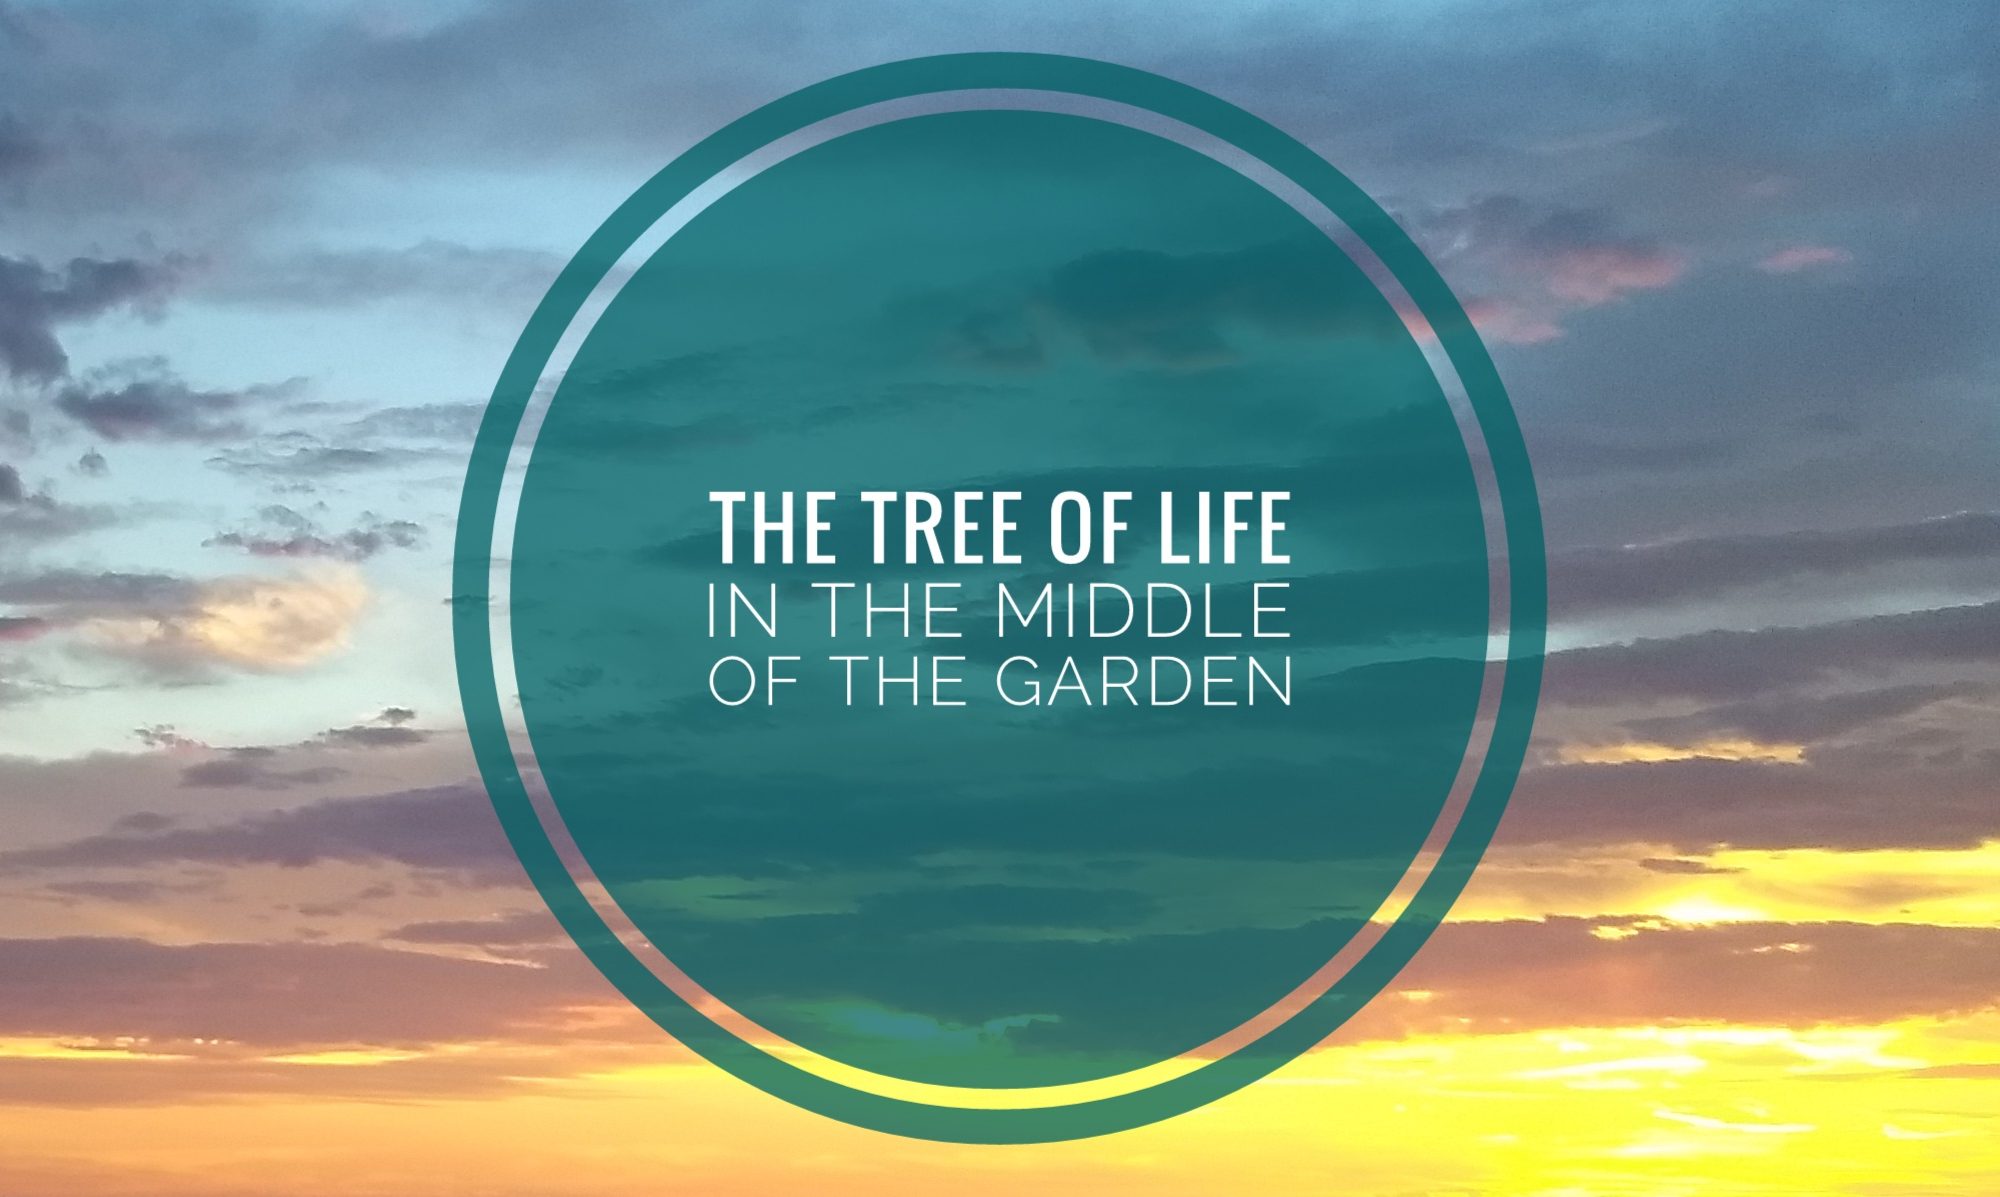 The tree of Life in the middle of the garden